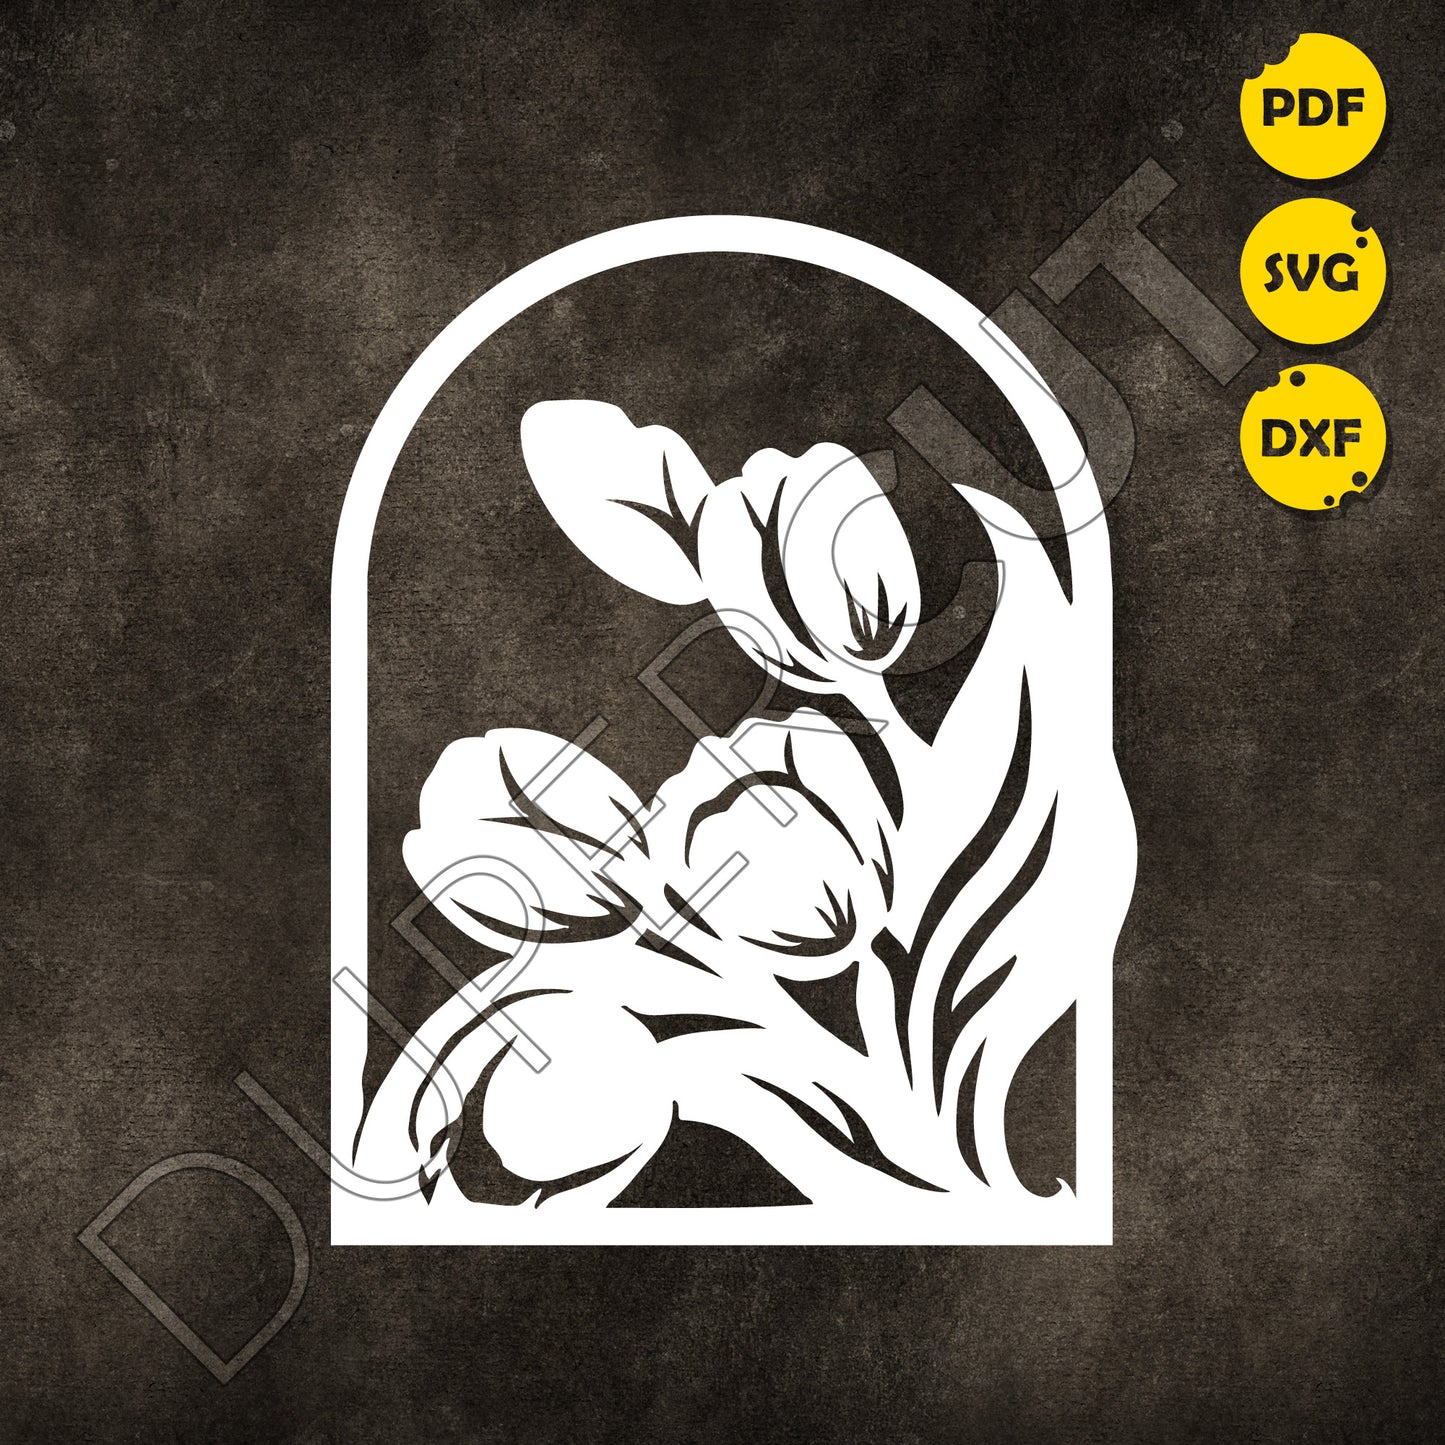 SVG PNG DXF Tulips bouquet - paper cutting template, print on demand files, for Cricut, Grlowforge, Silhouette